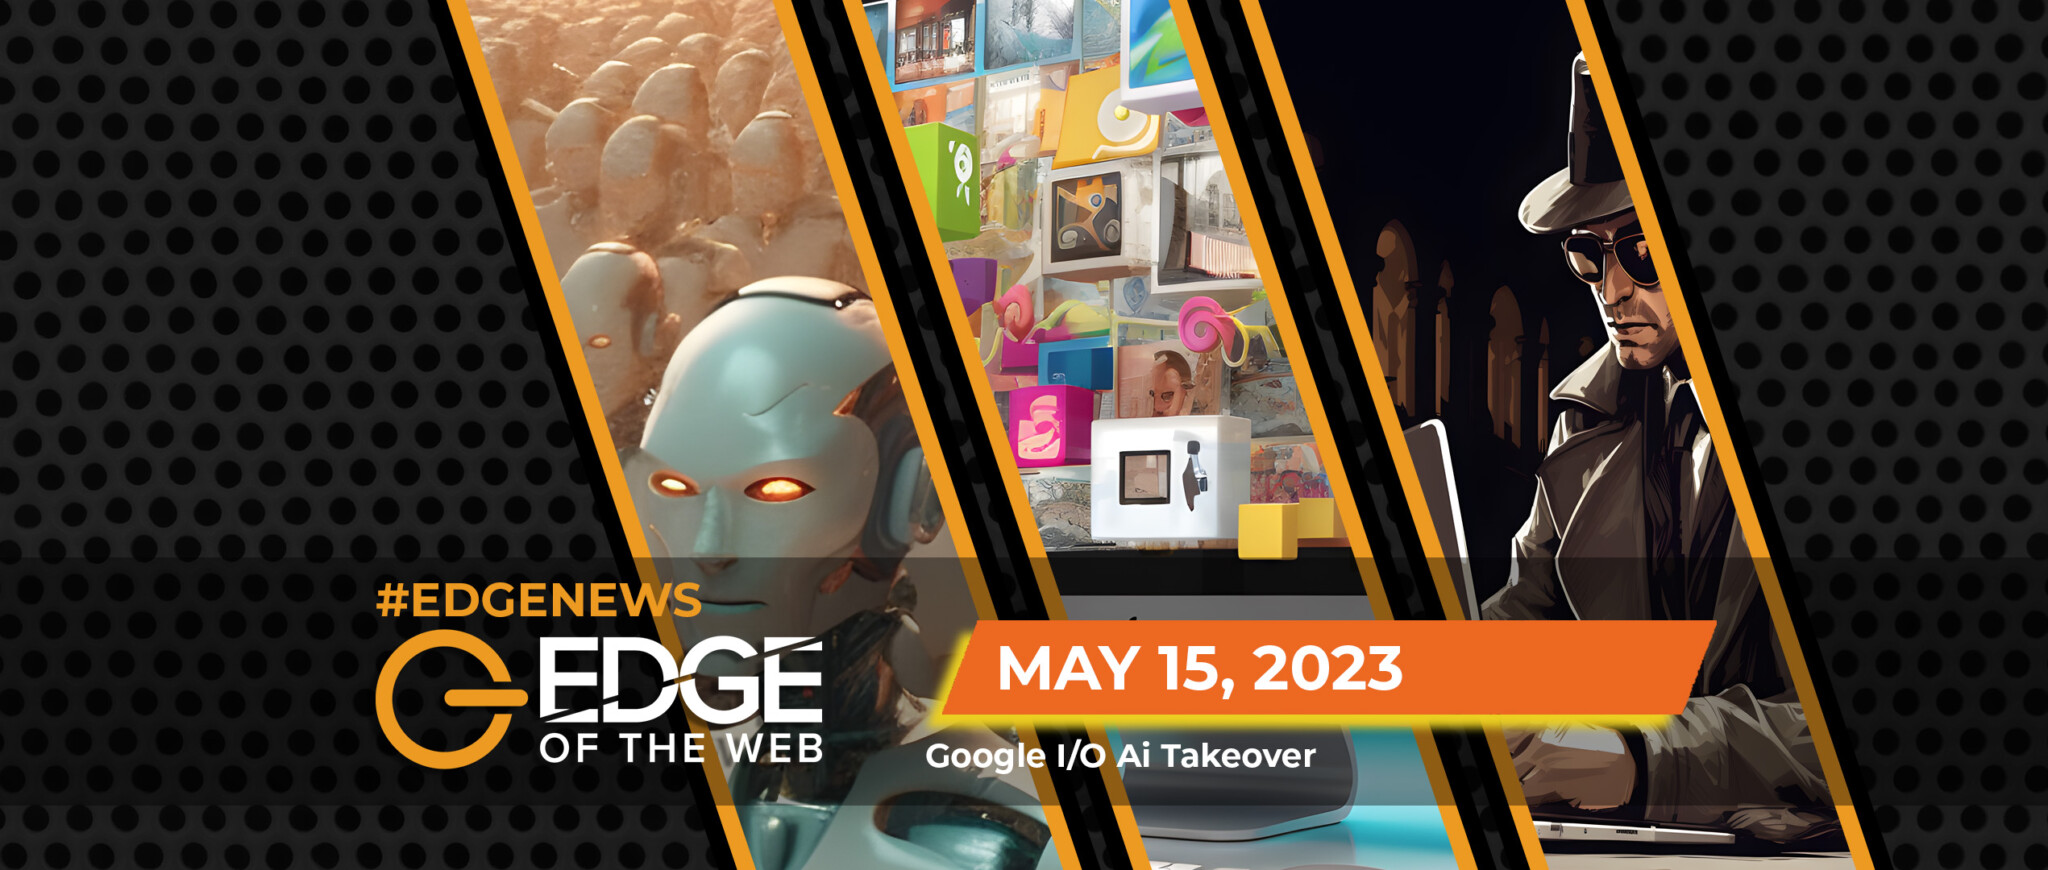 593 | News from the EDGE | Week of 5.15.2023